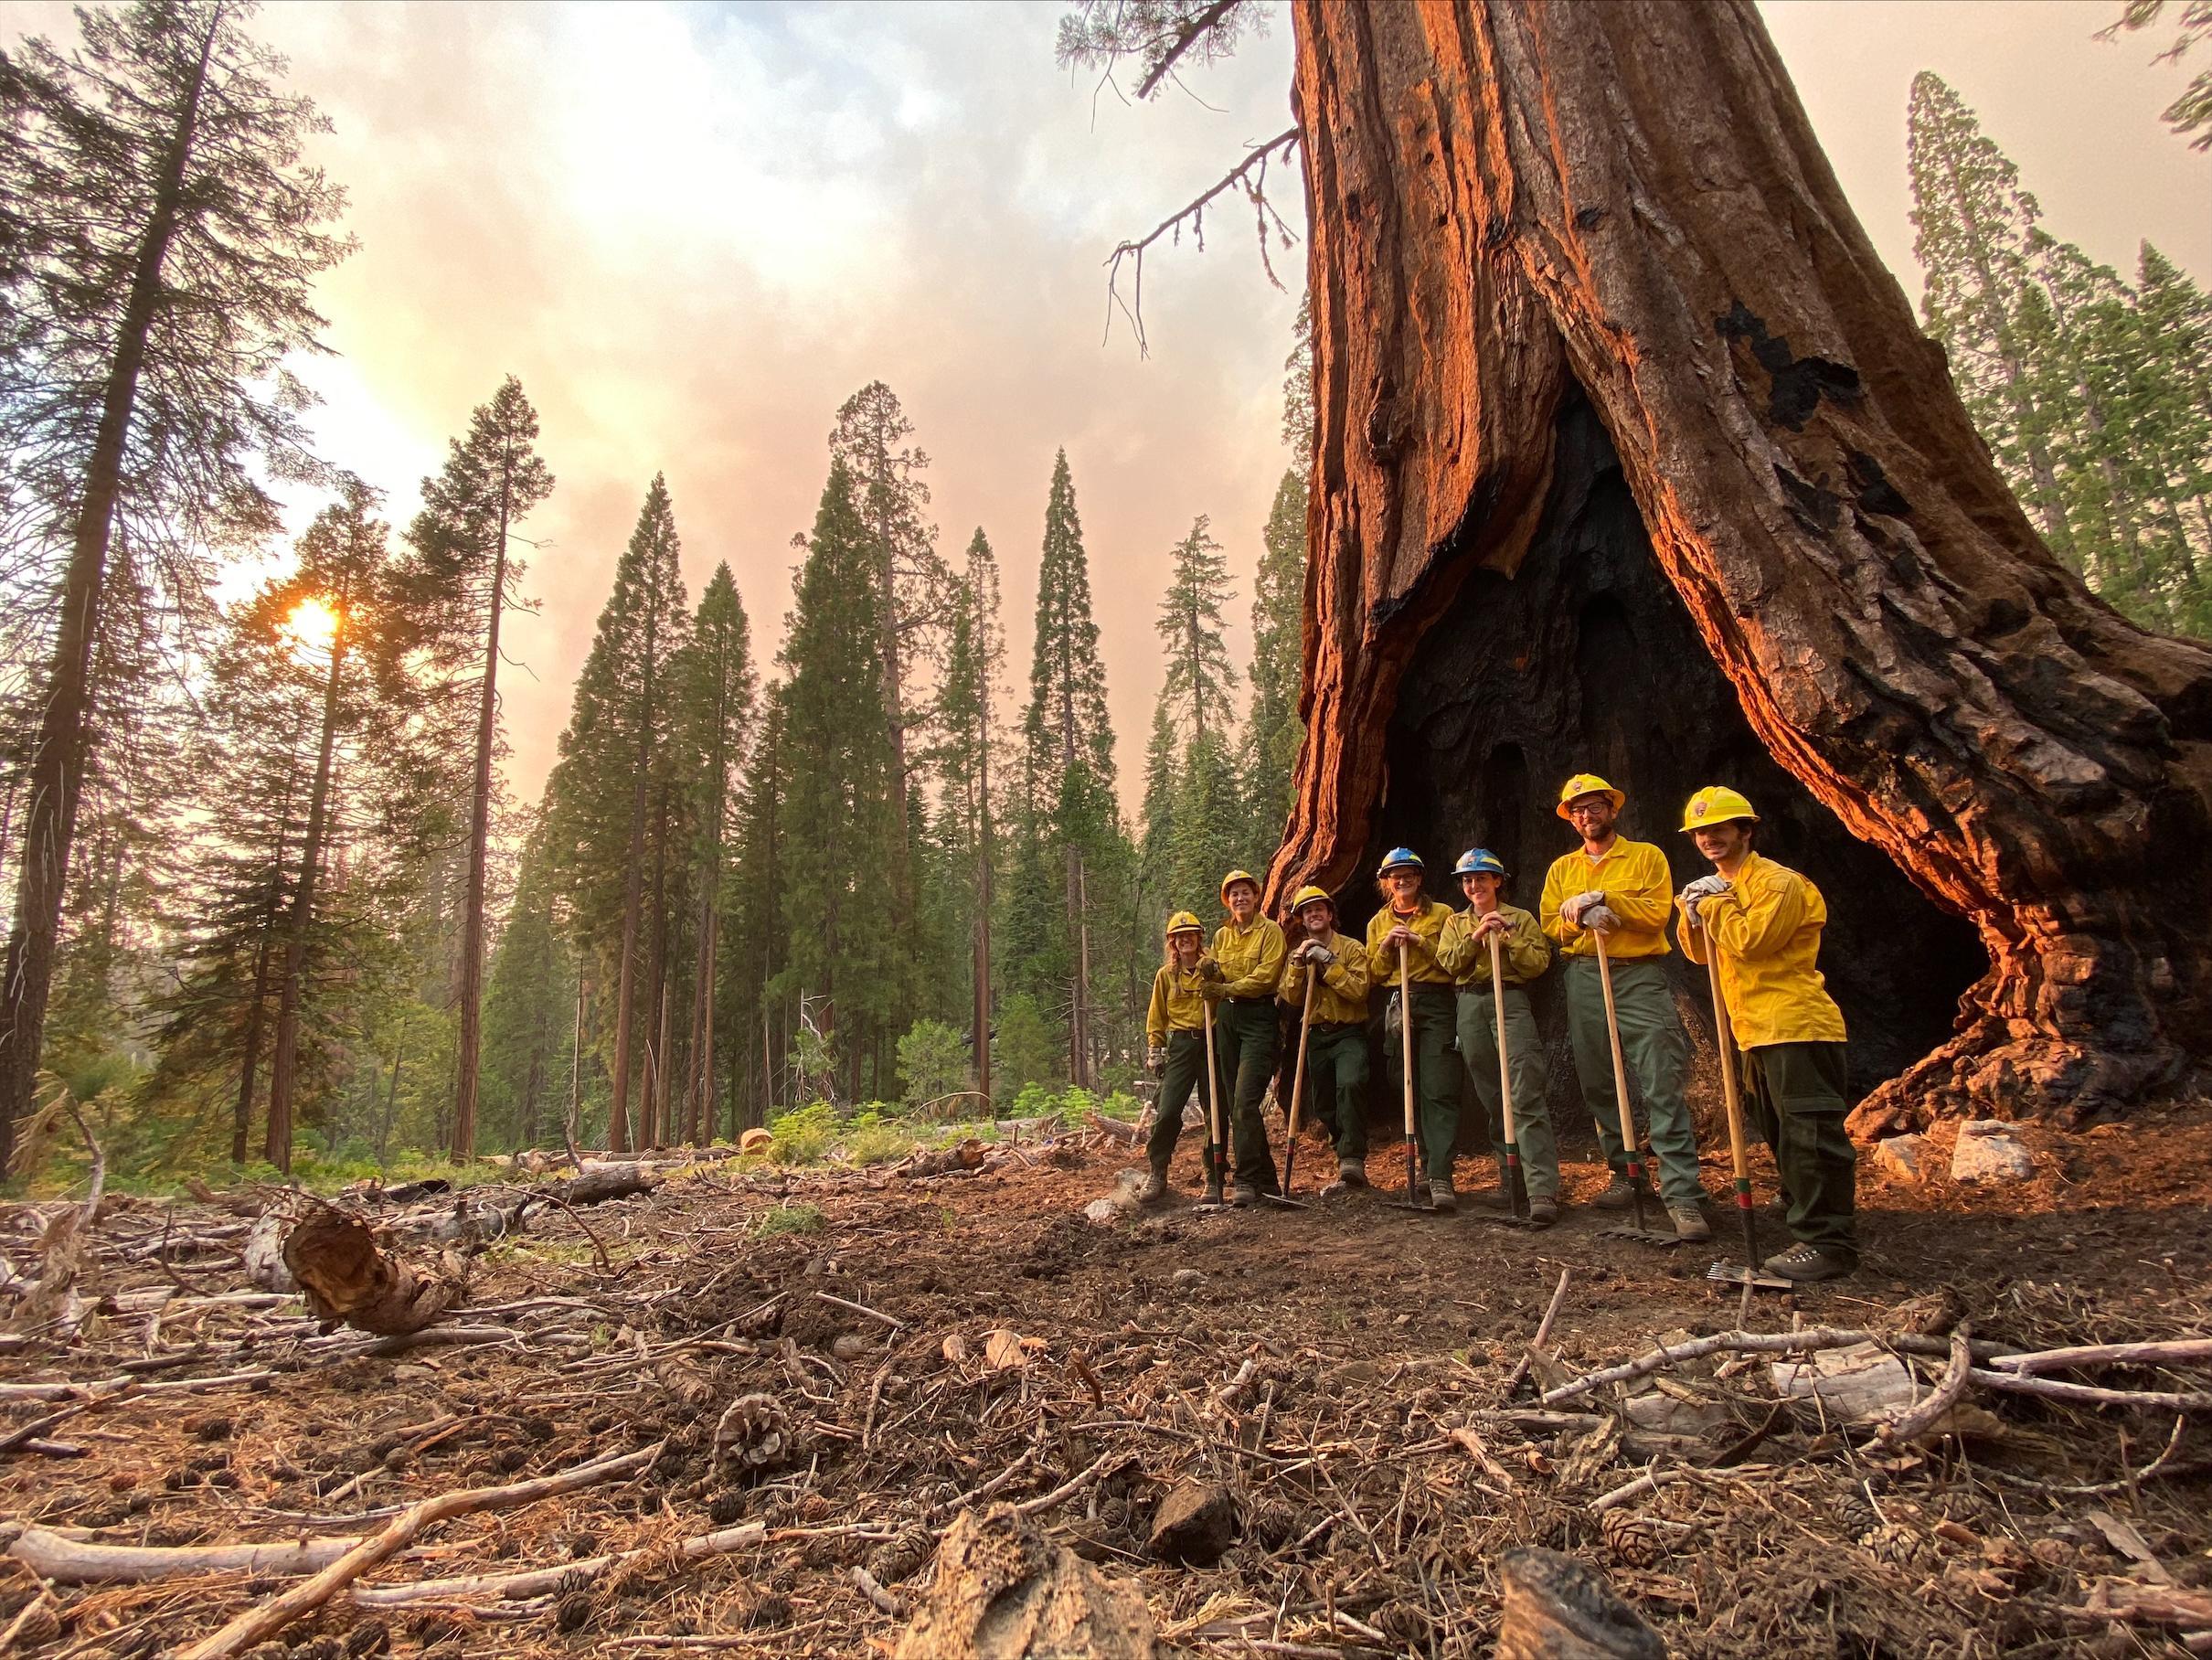 Crew of resource advisors pose in front of giant sequoia tree after assisting fire personnel in fuels mitigation around the giant beauties. 